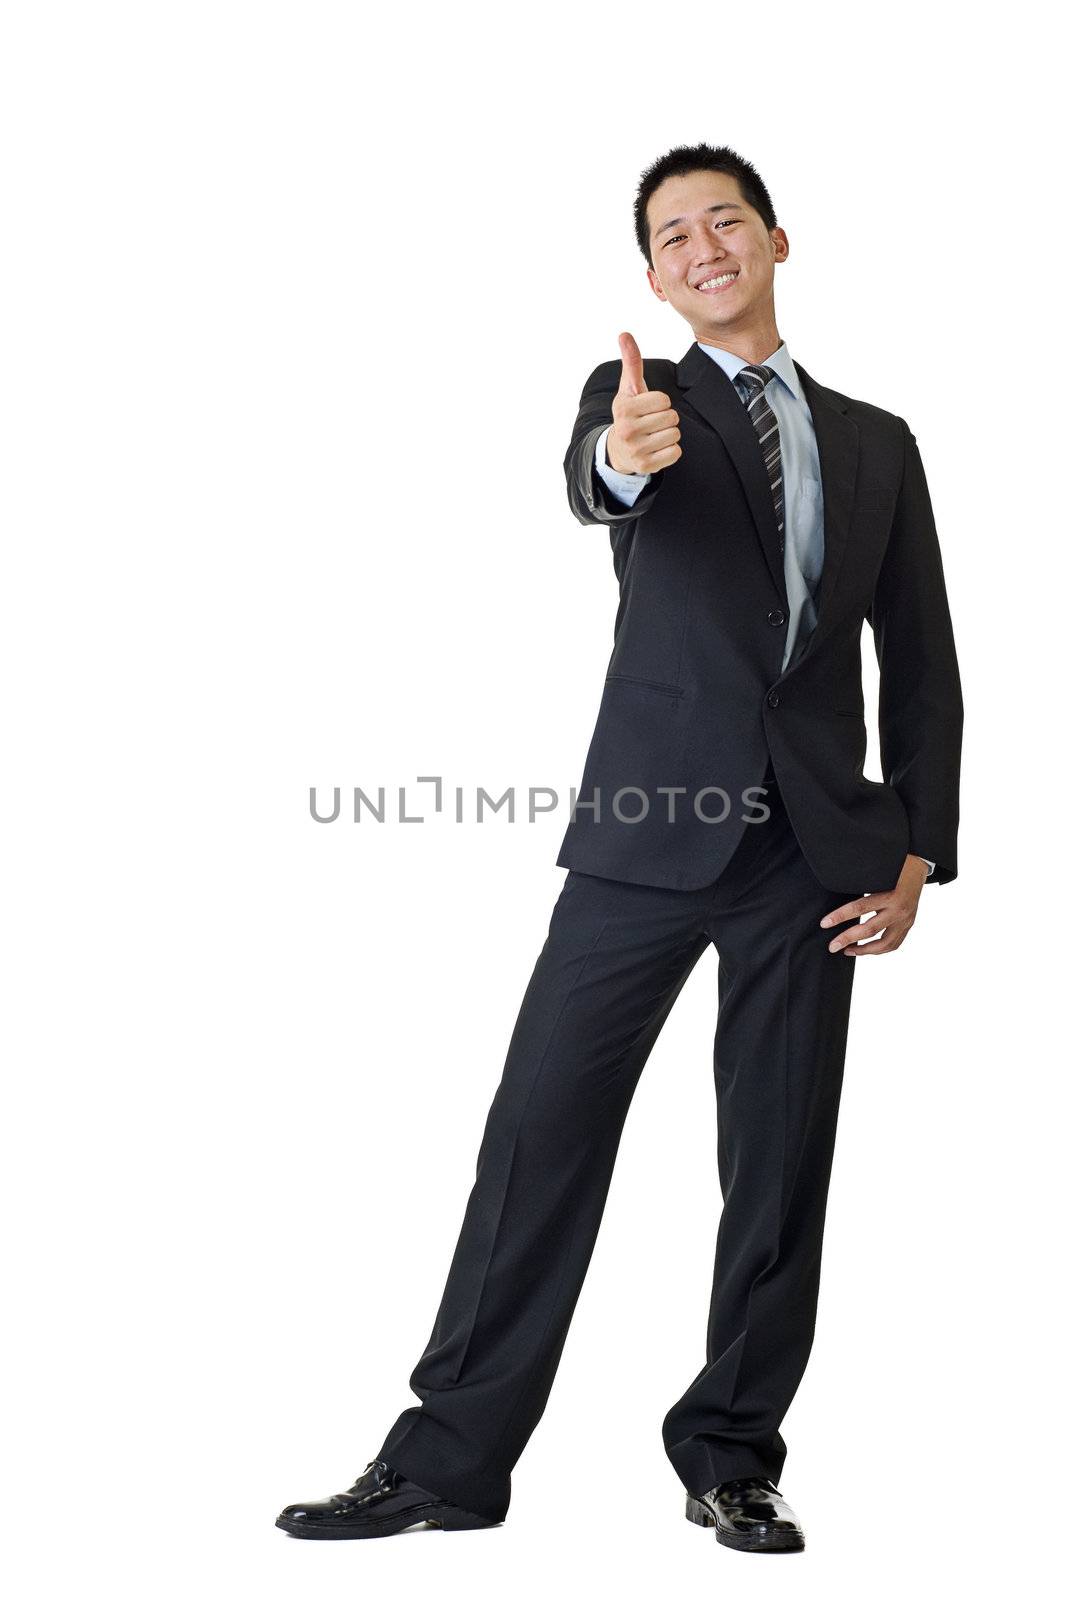 Young businessman smiling portrait isolated on white background.